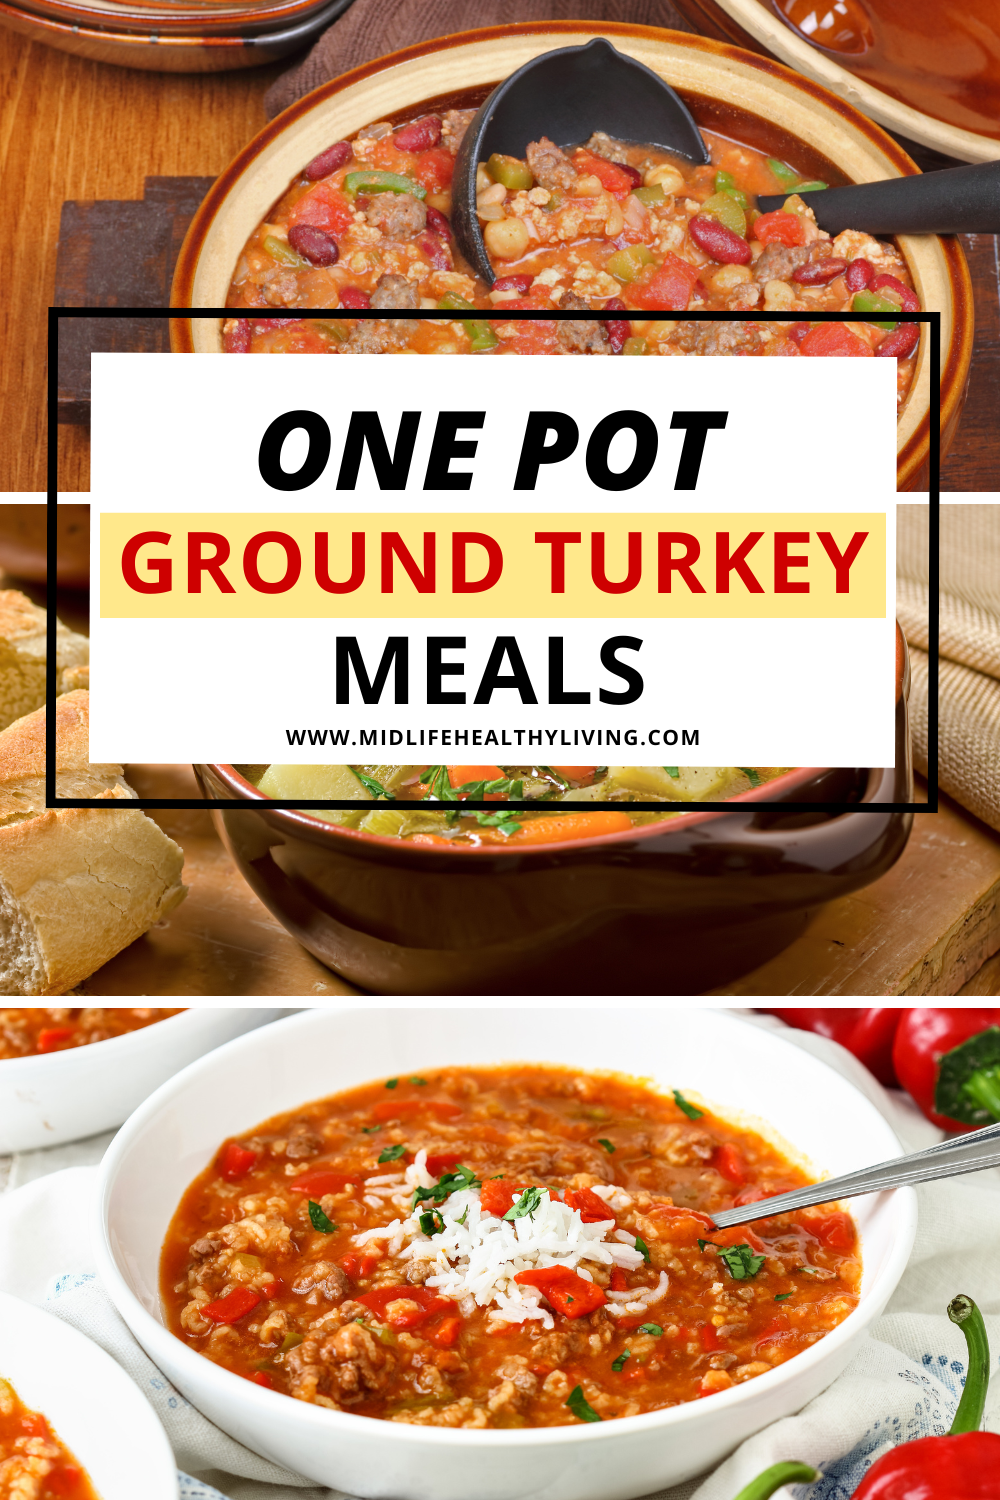  featured image of ground turkey recipes that you can make in just one pot. Pot of chili with black ladle and white bowl of stuffed pepper soup